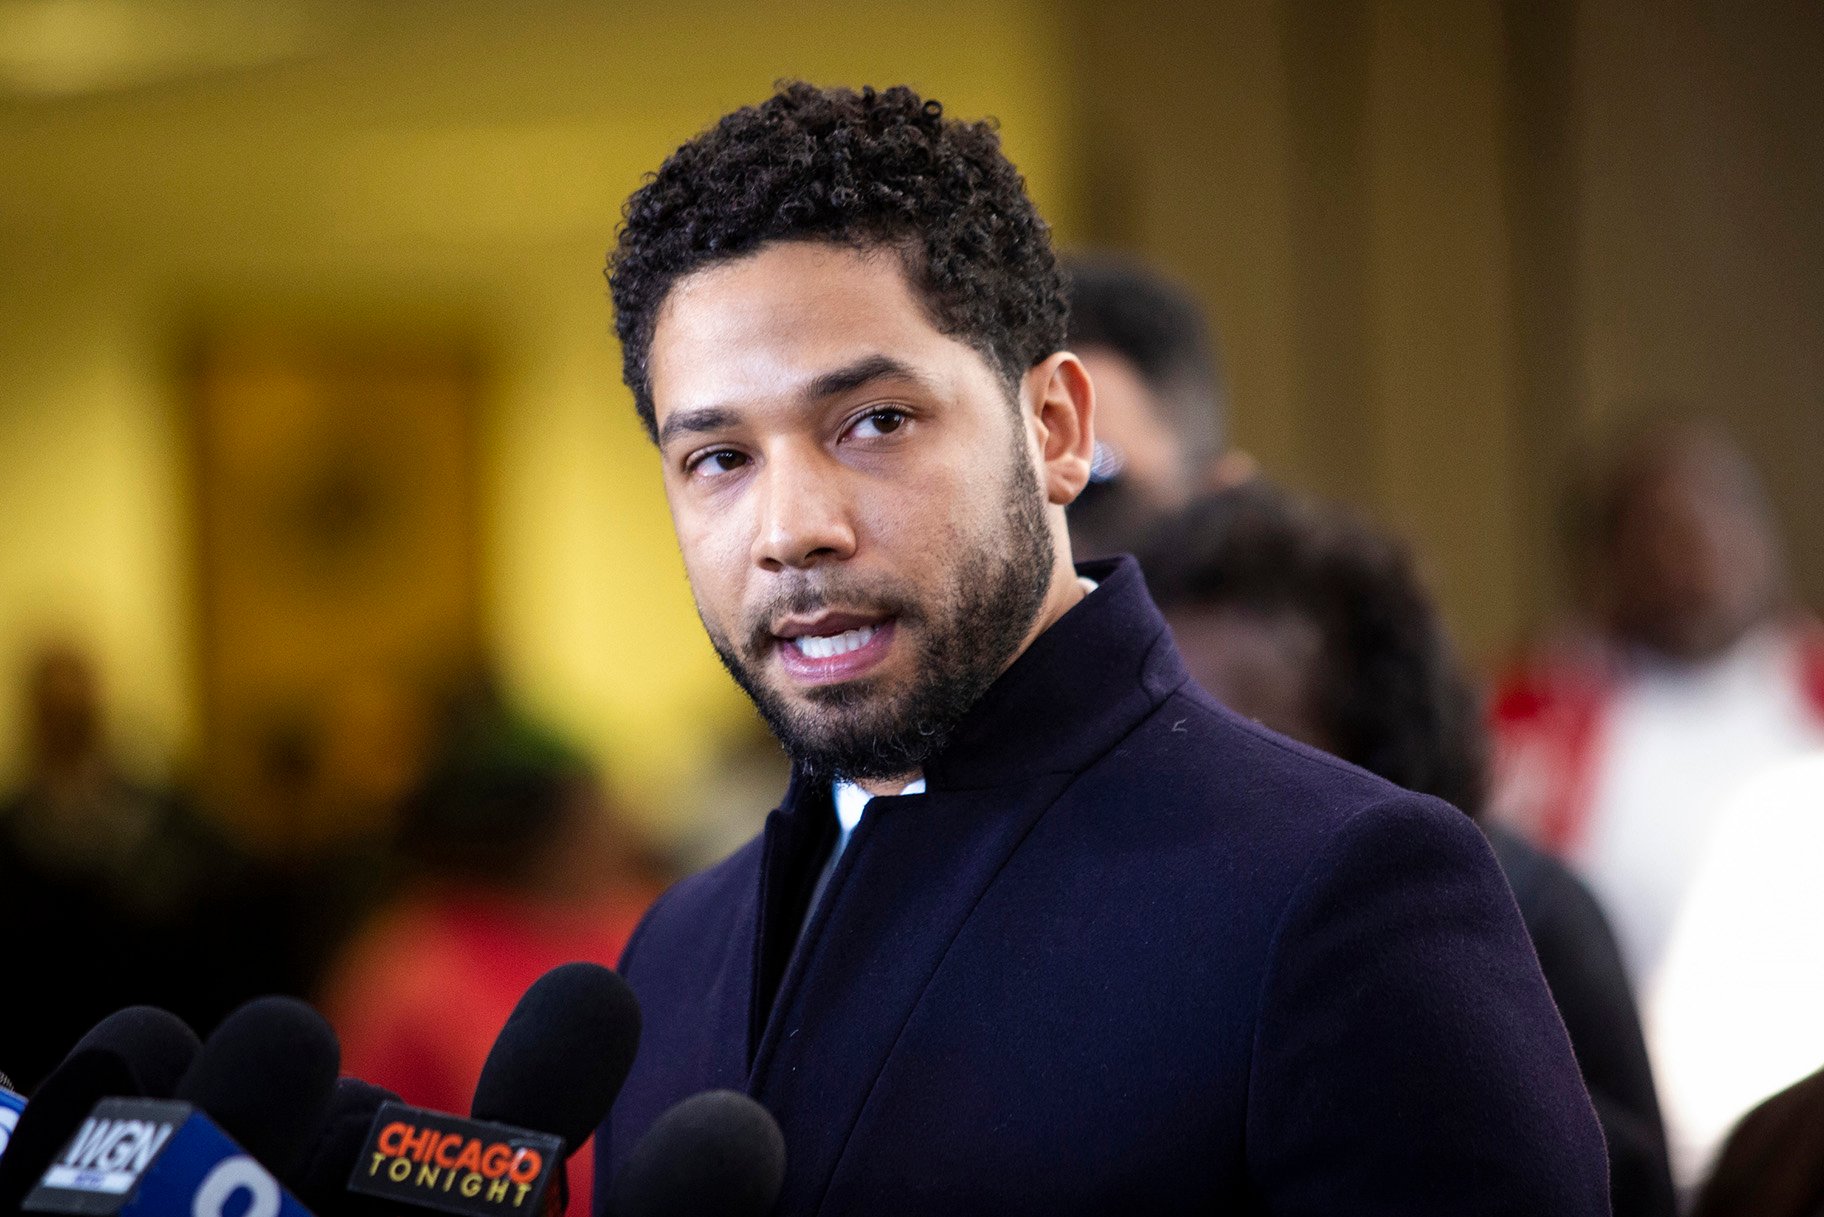 Actor Jussie Smollett leaves the Leighton Criminal Courthouse in Chicago on Tuesday March 26, 2019, after prosecutors dropped all charges against him. (Ashlee Rezin / Chicago Sun-Times via AP)